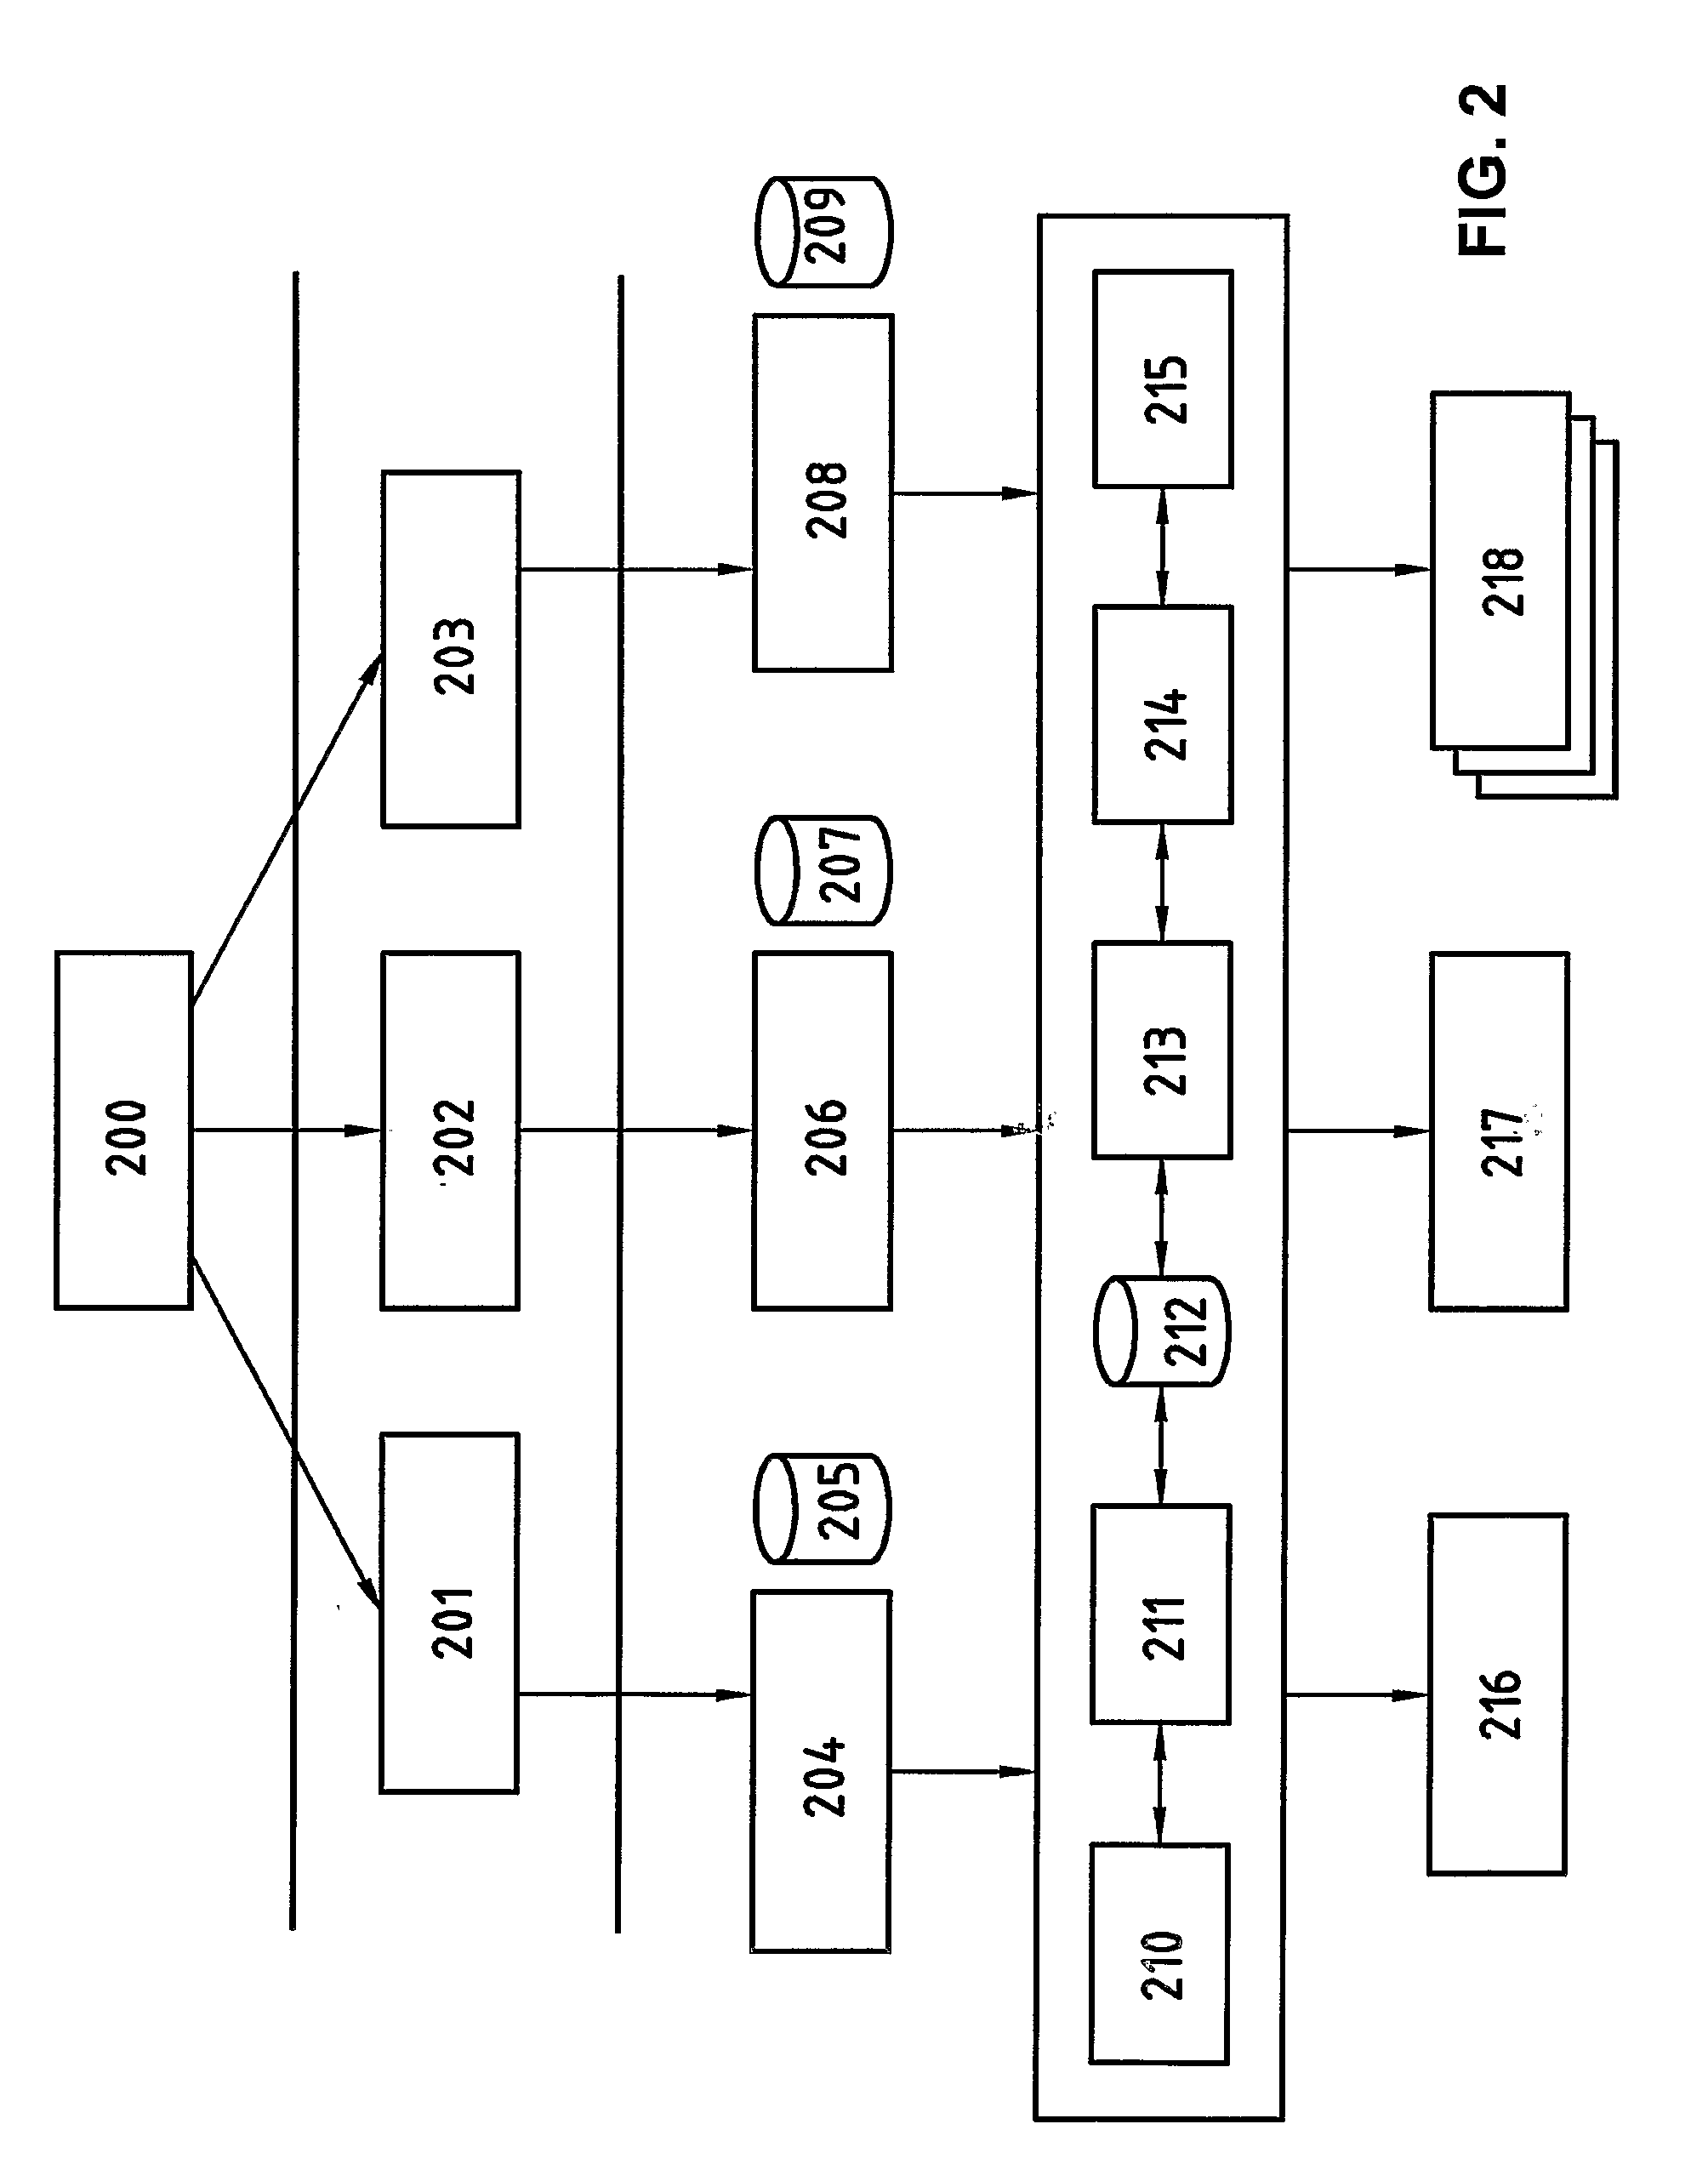 System and Method for Transaction Payment in Multiple Languages and Currencies